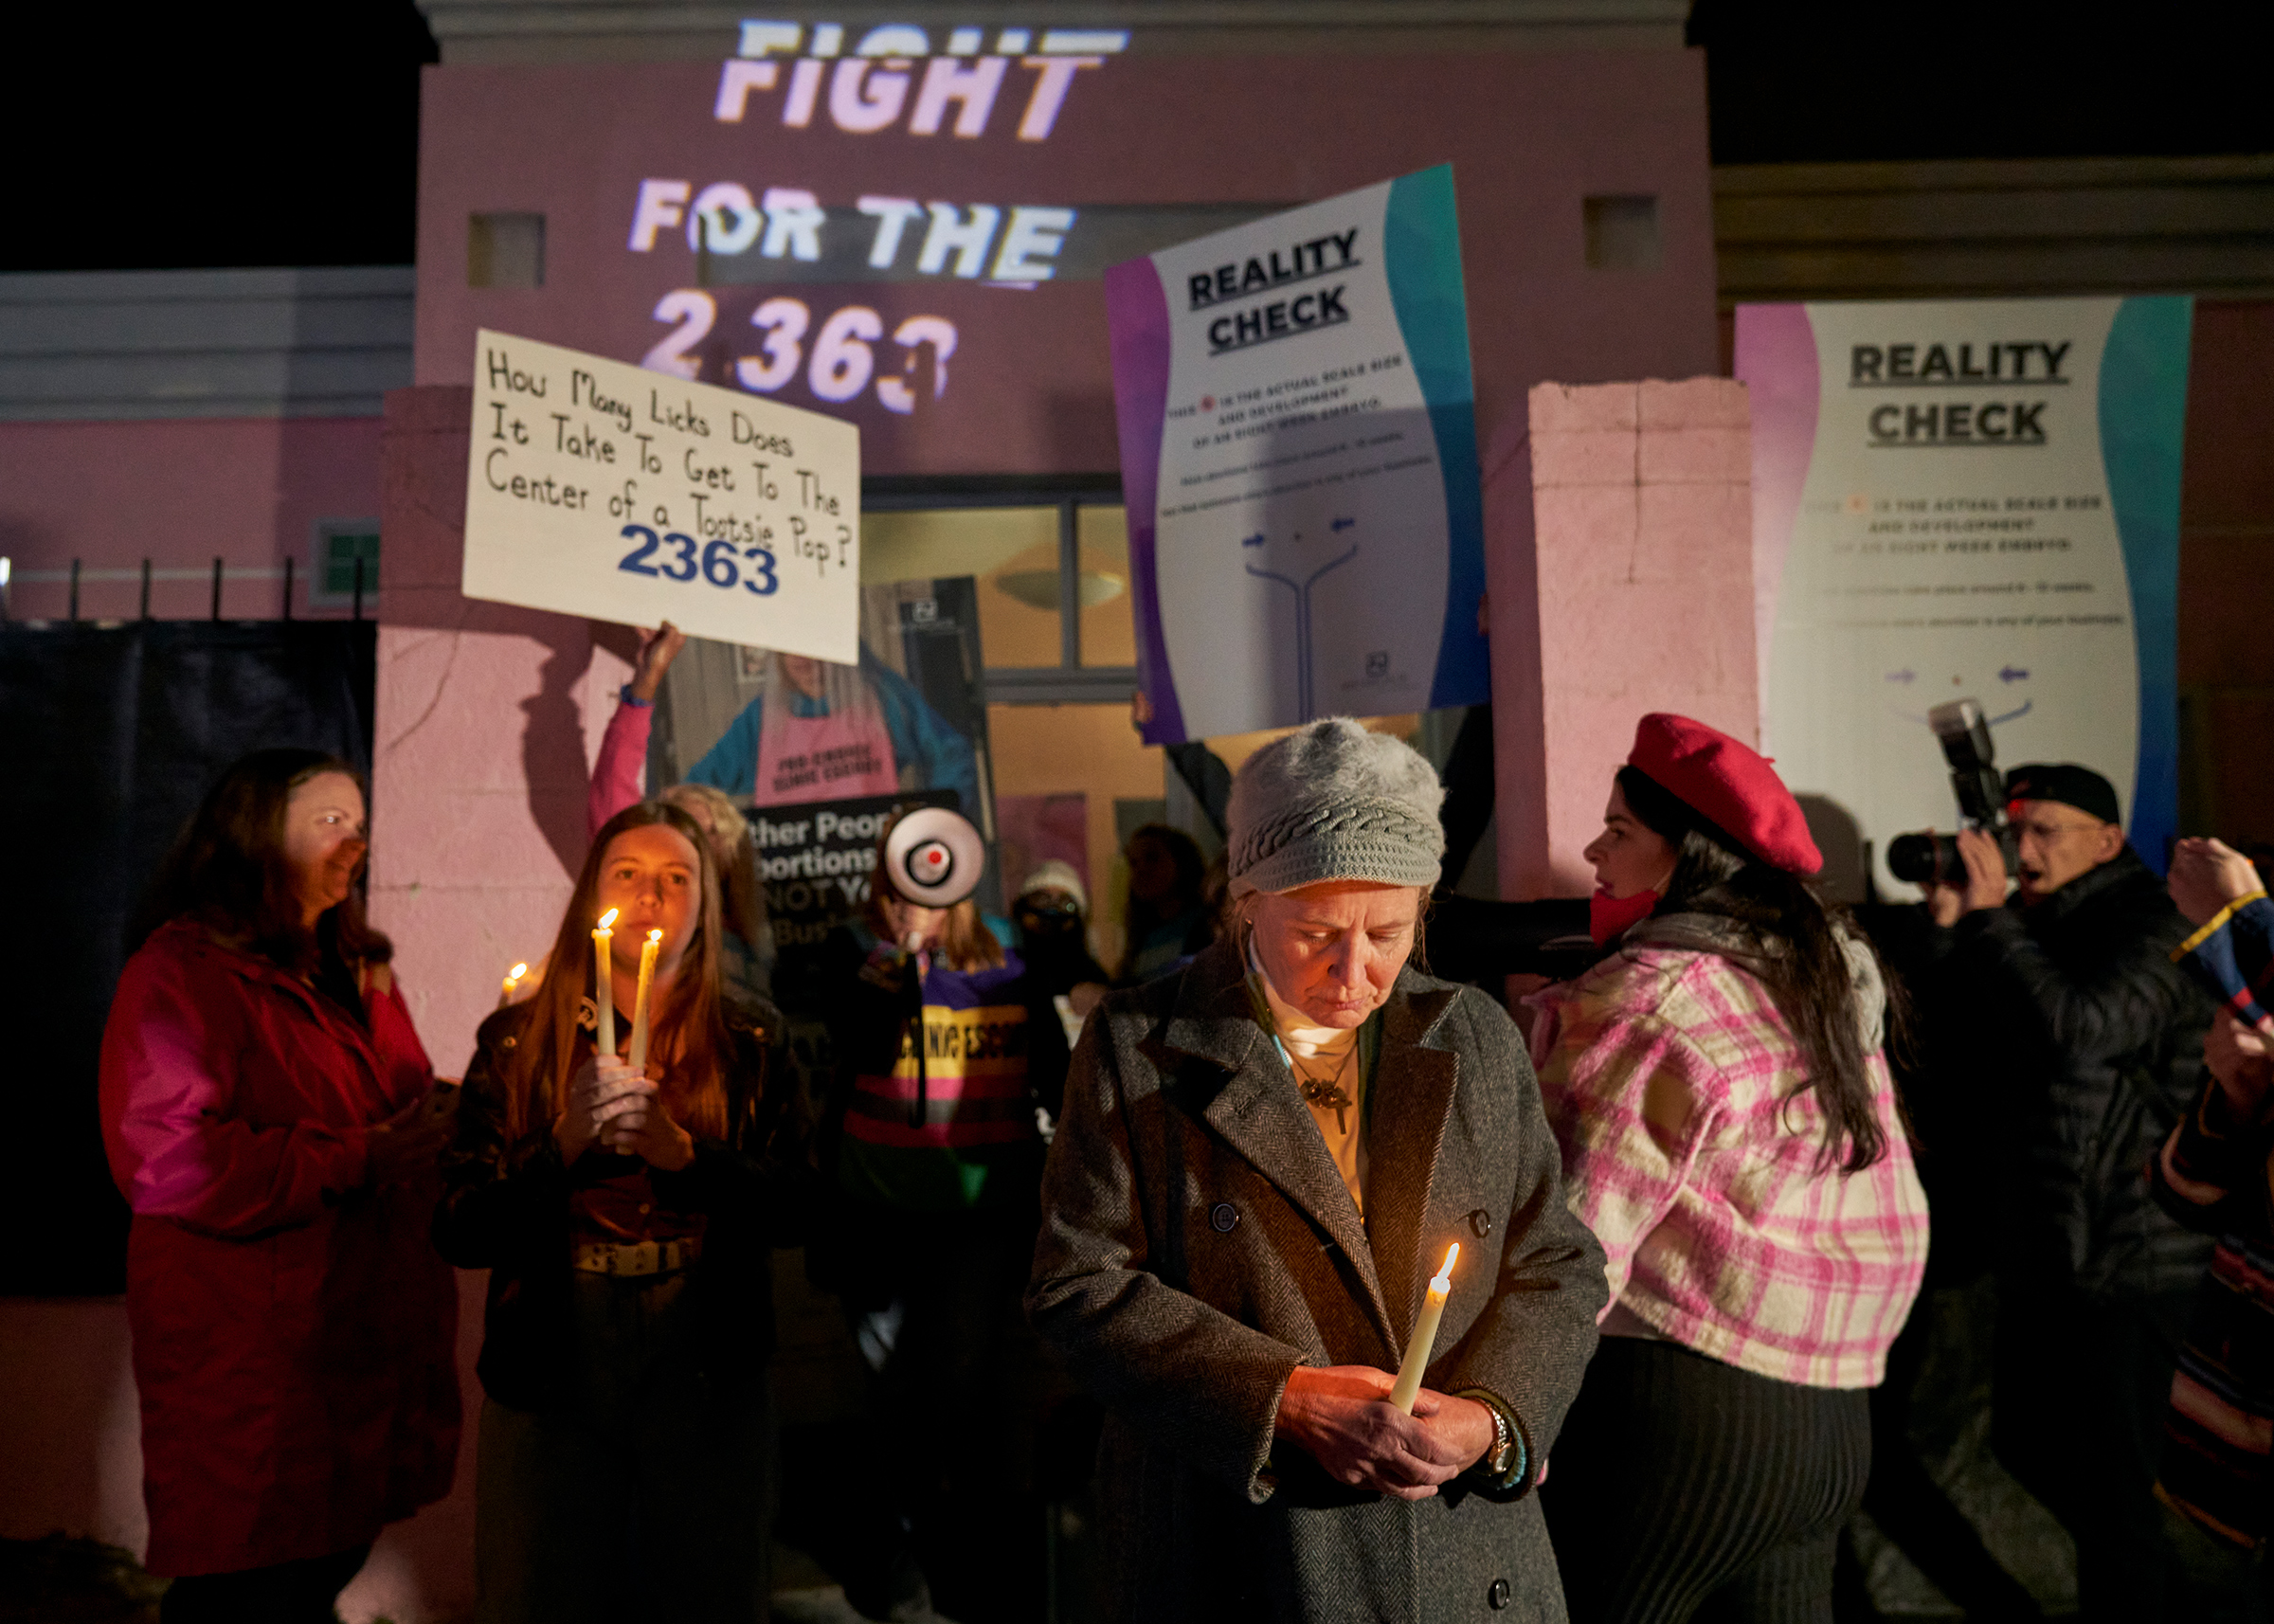 National <a href="https://time.com/6116072/mississippi-abortion-supreme-court-jackson-womens-health/">anti-abortion groups</a> like Live Action protest at the Jackson clinic ahead of a Supreme Court hearing. (Stacy Kranitz for TIME)